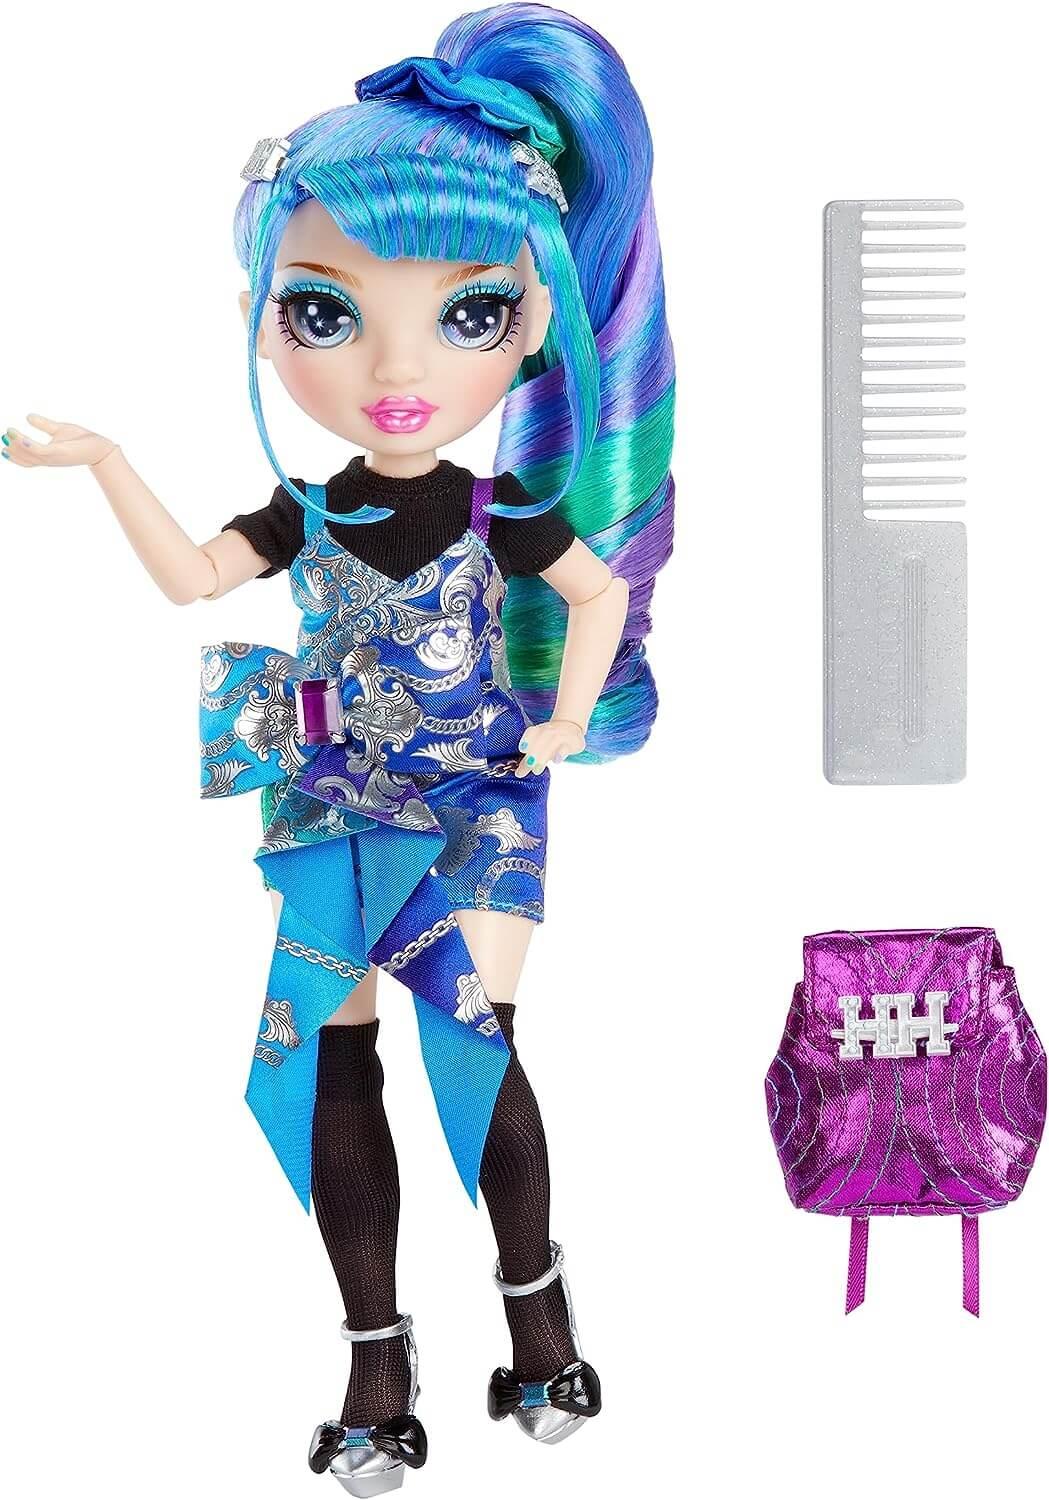 Rainbow High Jr High Special Edition Holly De’Vious - 9" Blue and Green Posable Fashion Doll